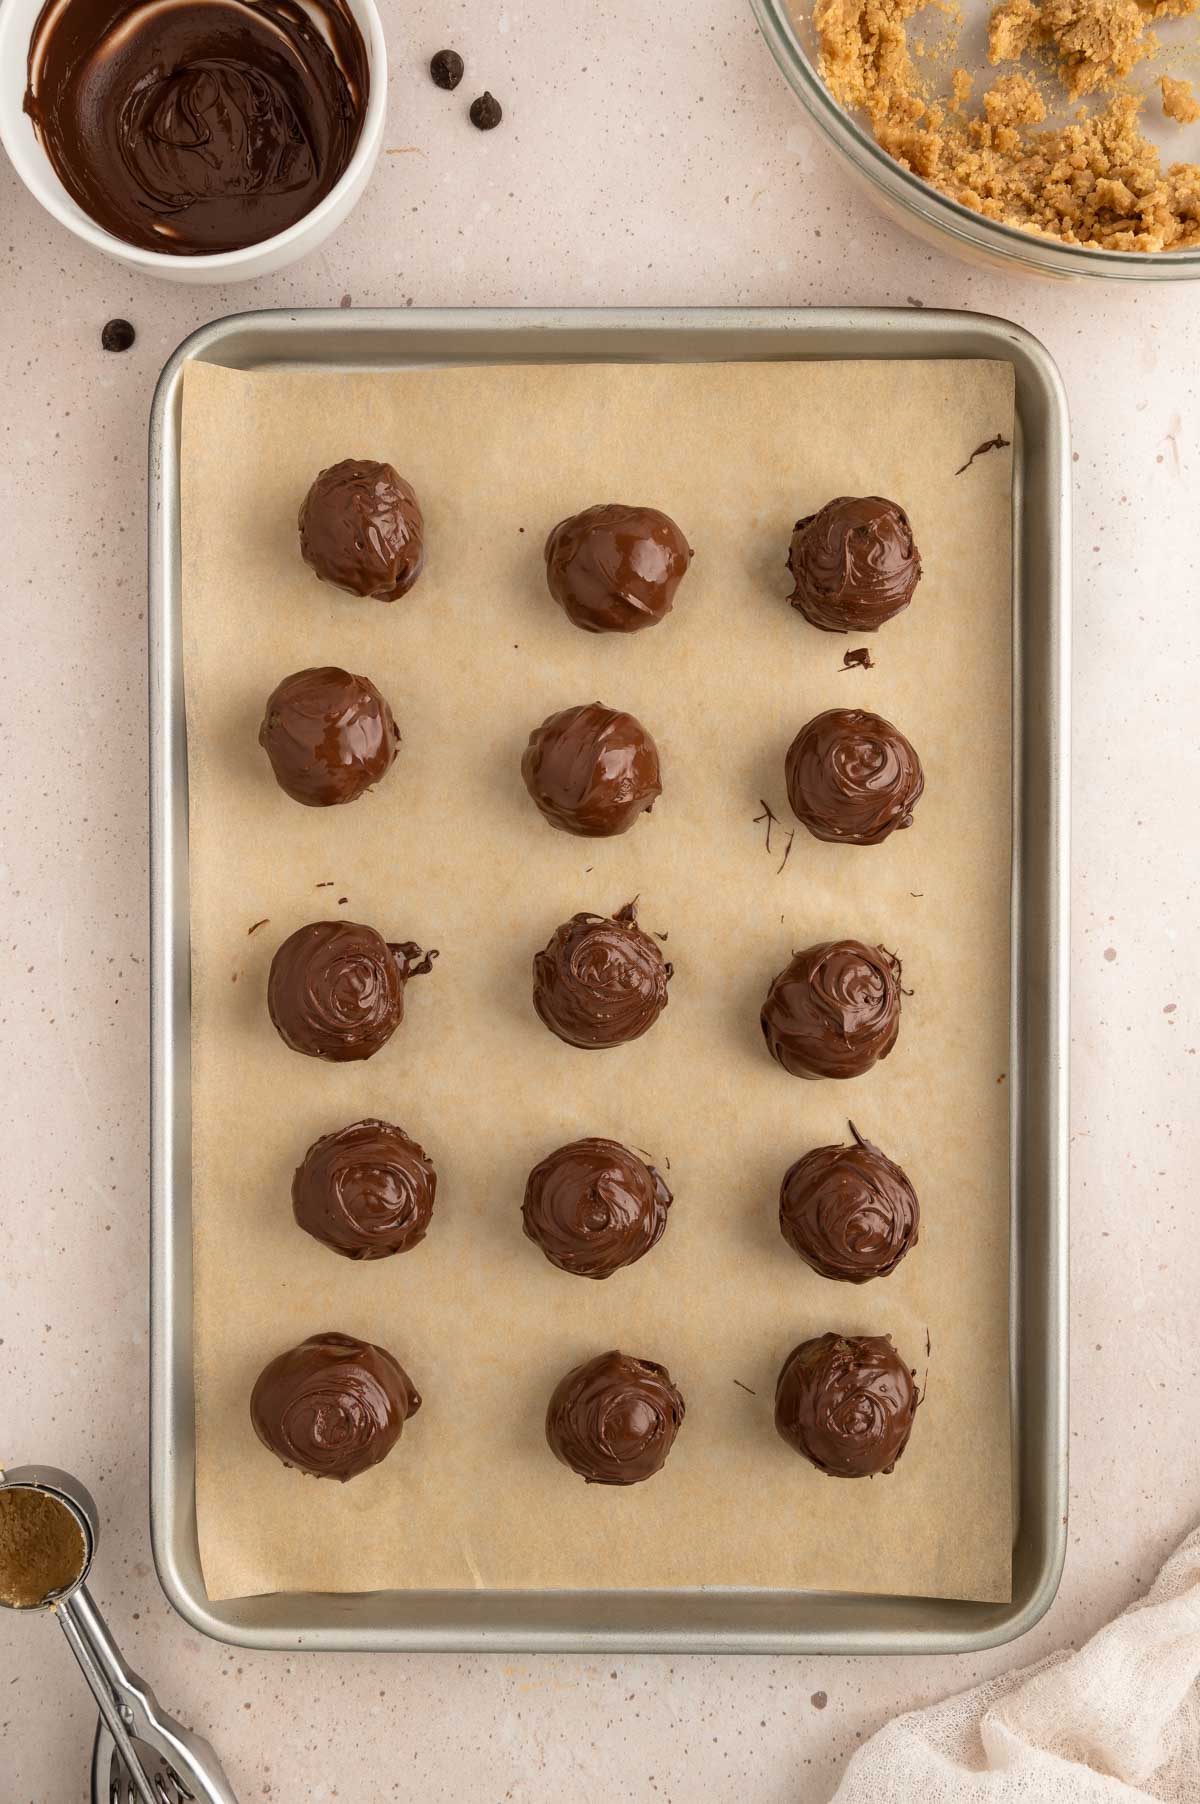 Chocolate-coated cookie dough balls on a baking sheet.